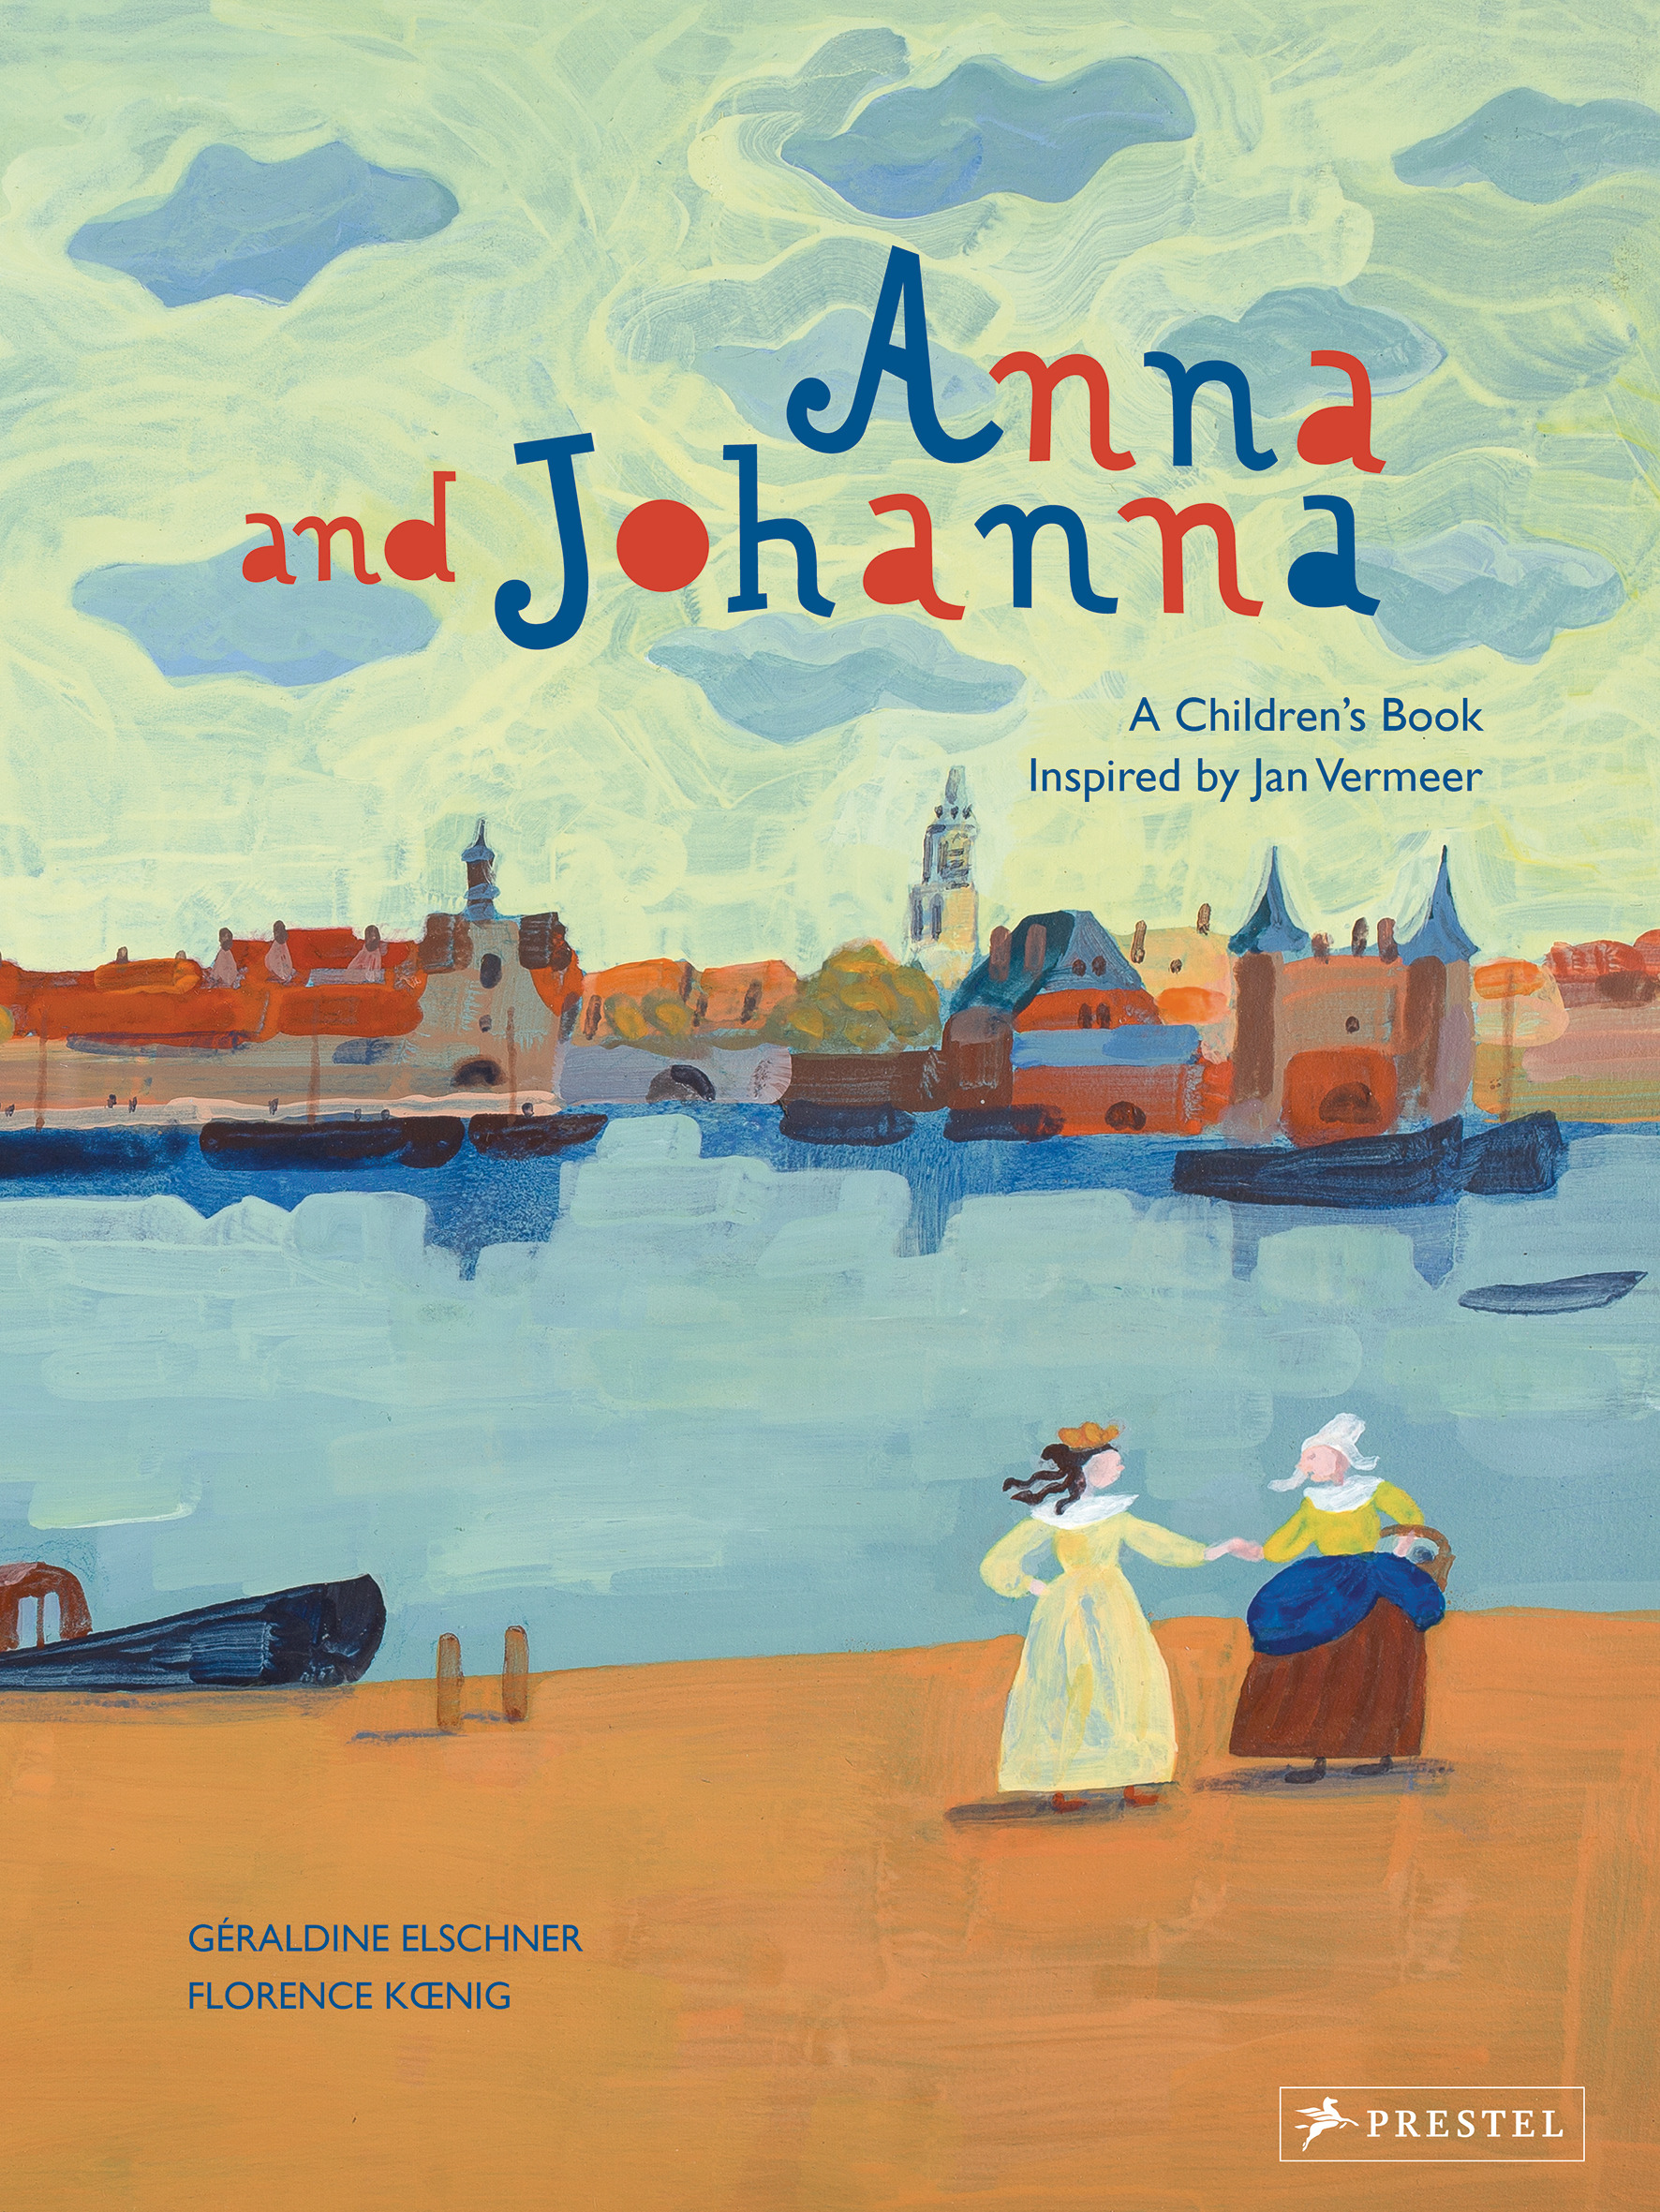 Anna and Johanna: A Children’s Book Inspired by Jan Verme...n
by Géraldine Elschner and Illustrated by Florence Kœnig 